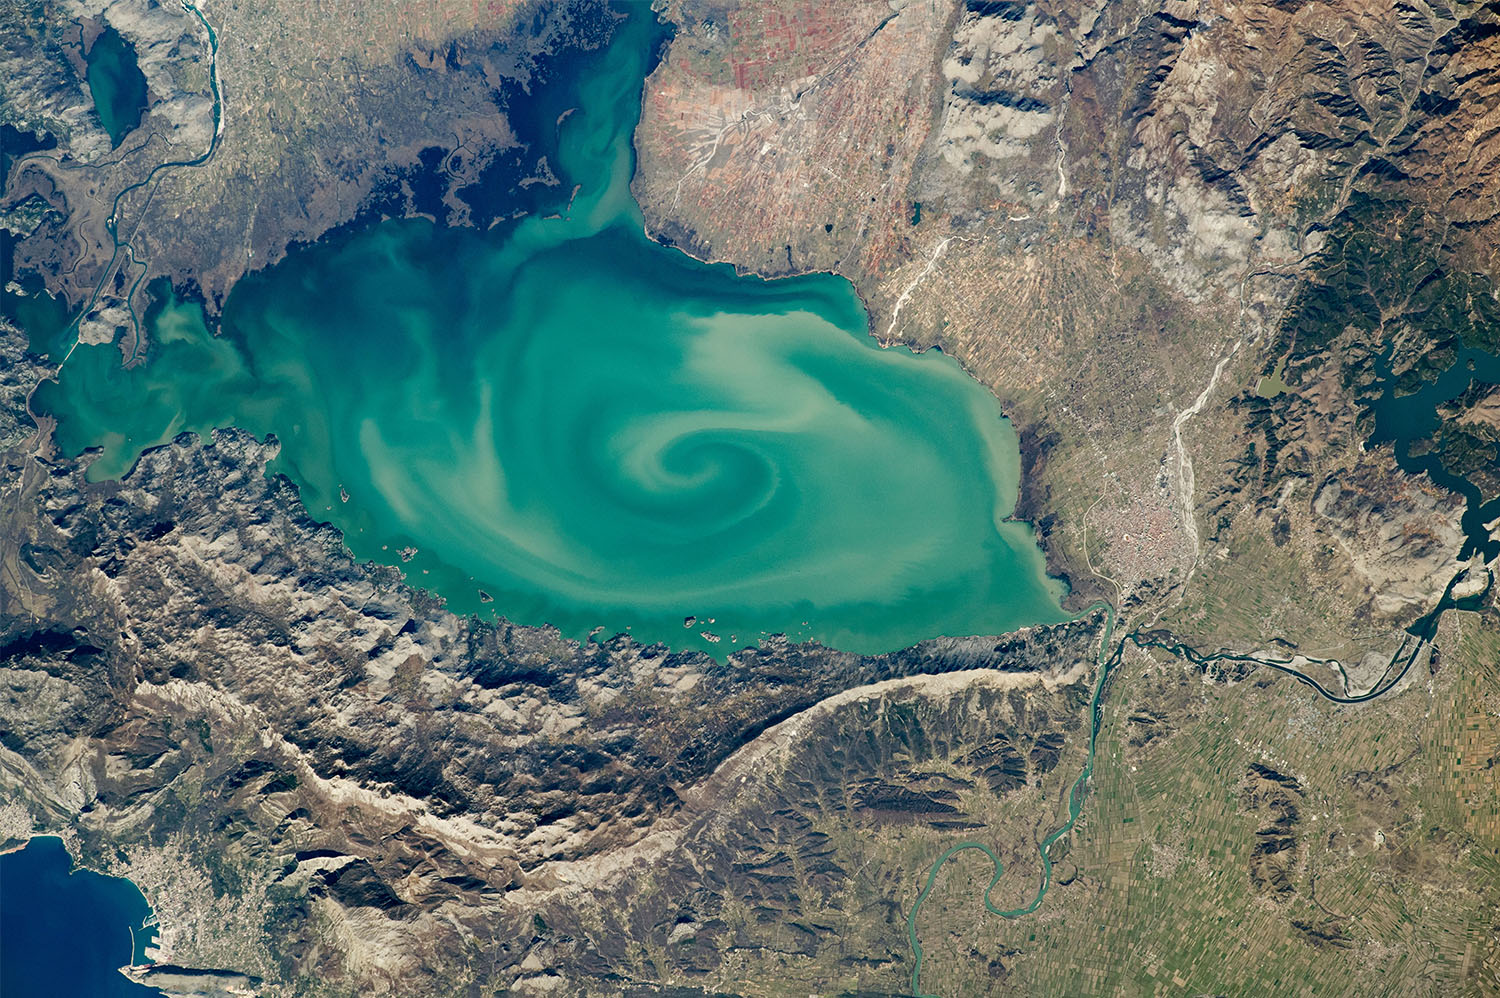 Lake Skadar. The largest lake on the Balkan Peninsula is colored by sediments eroded from the surrounding highlands. Credit: NASA.